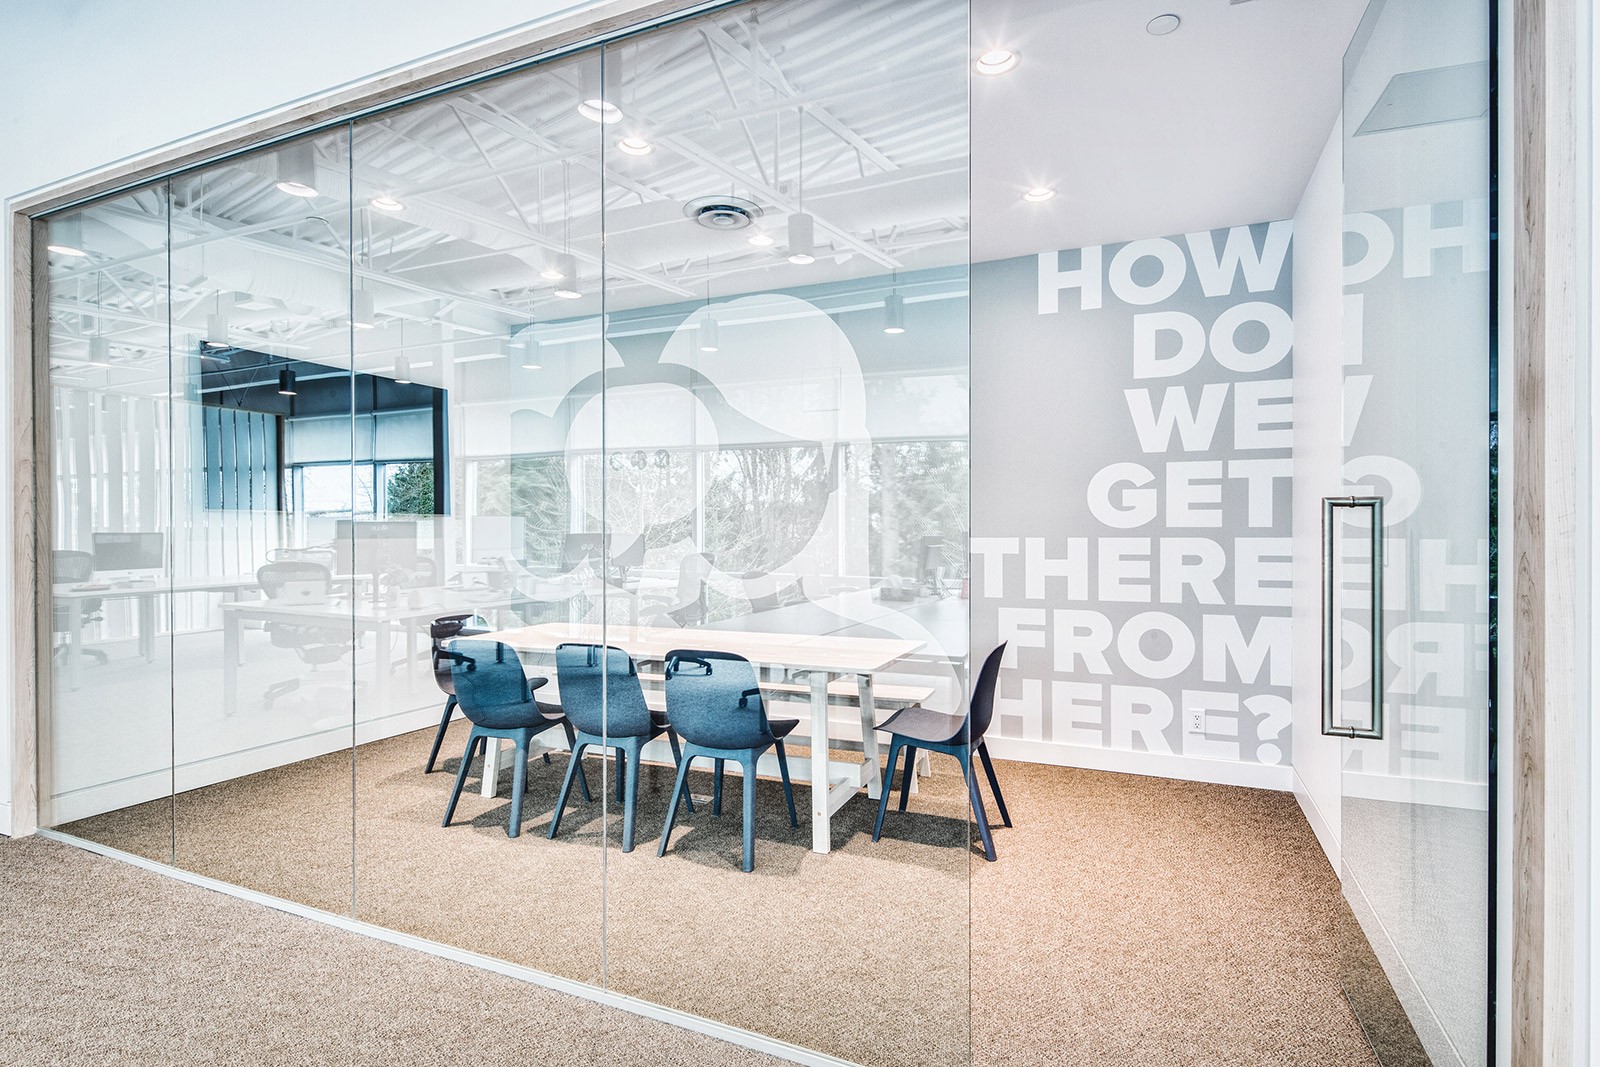 7 Tips for Improving the Health, Happiness and Productivity of Your Team Through Interior Design